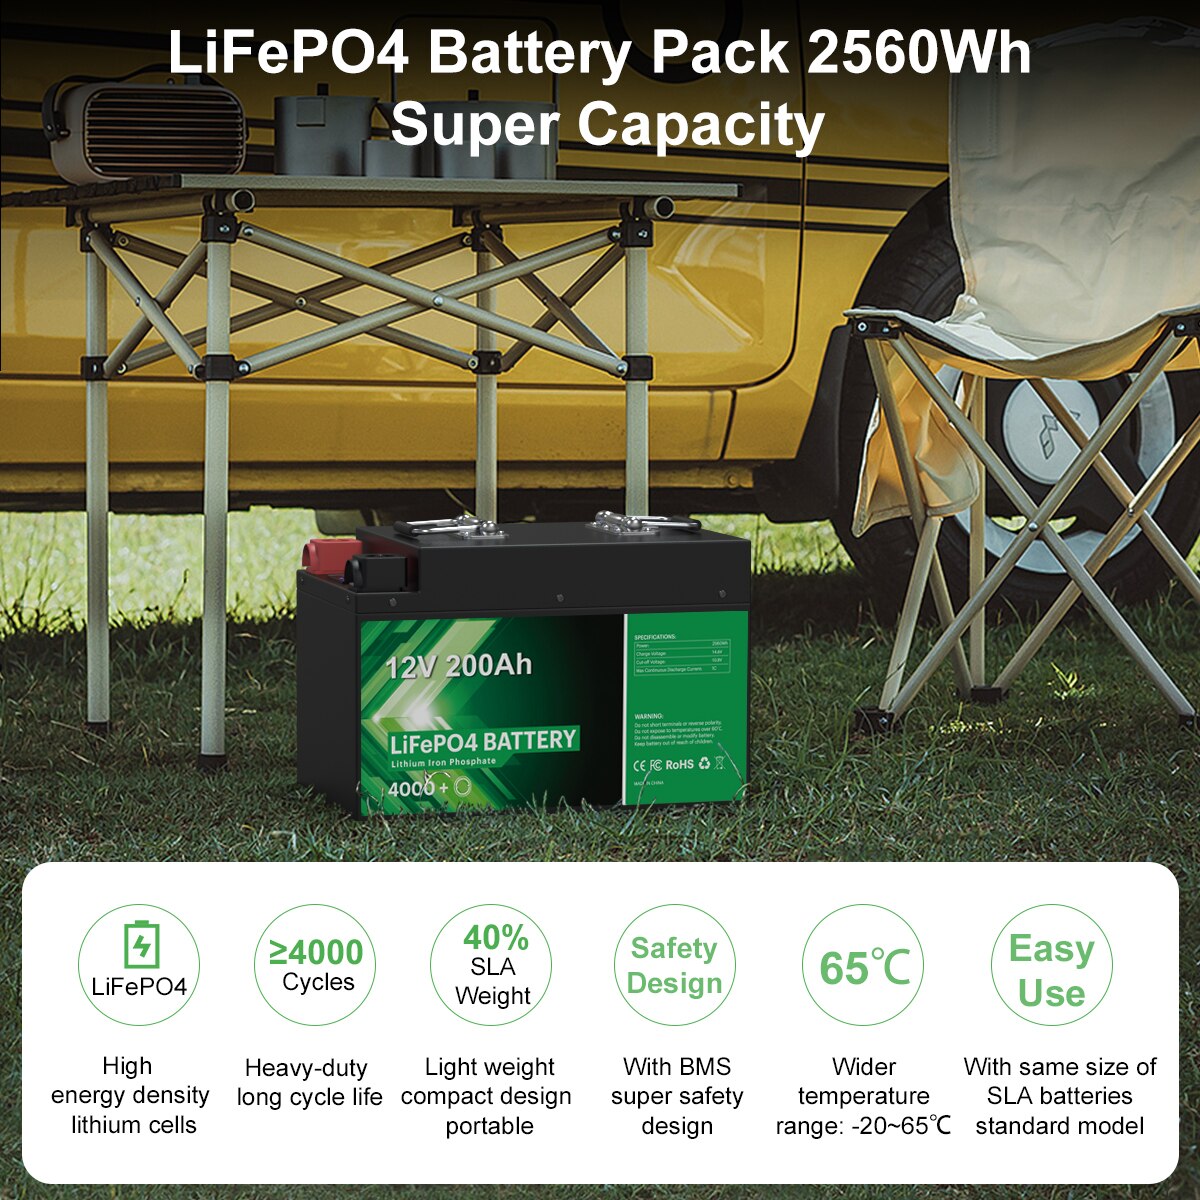 LiFePO4 Battery Pack 2560Wh Super Capa